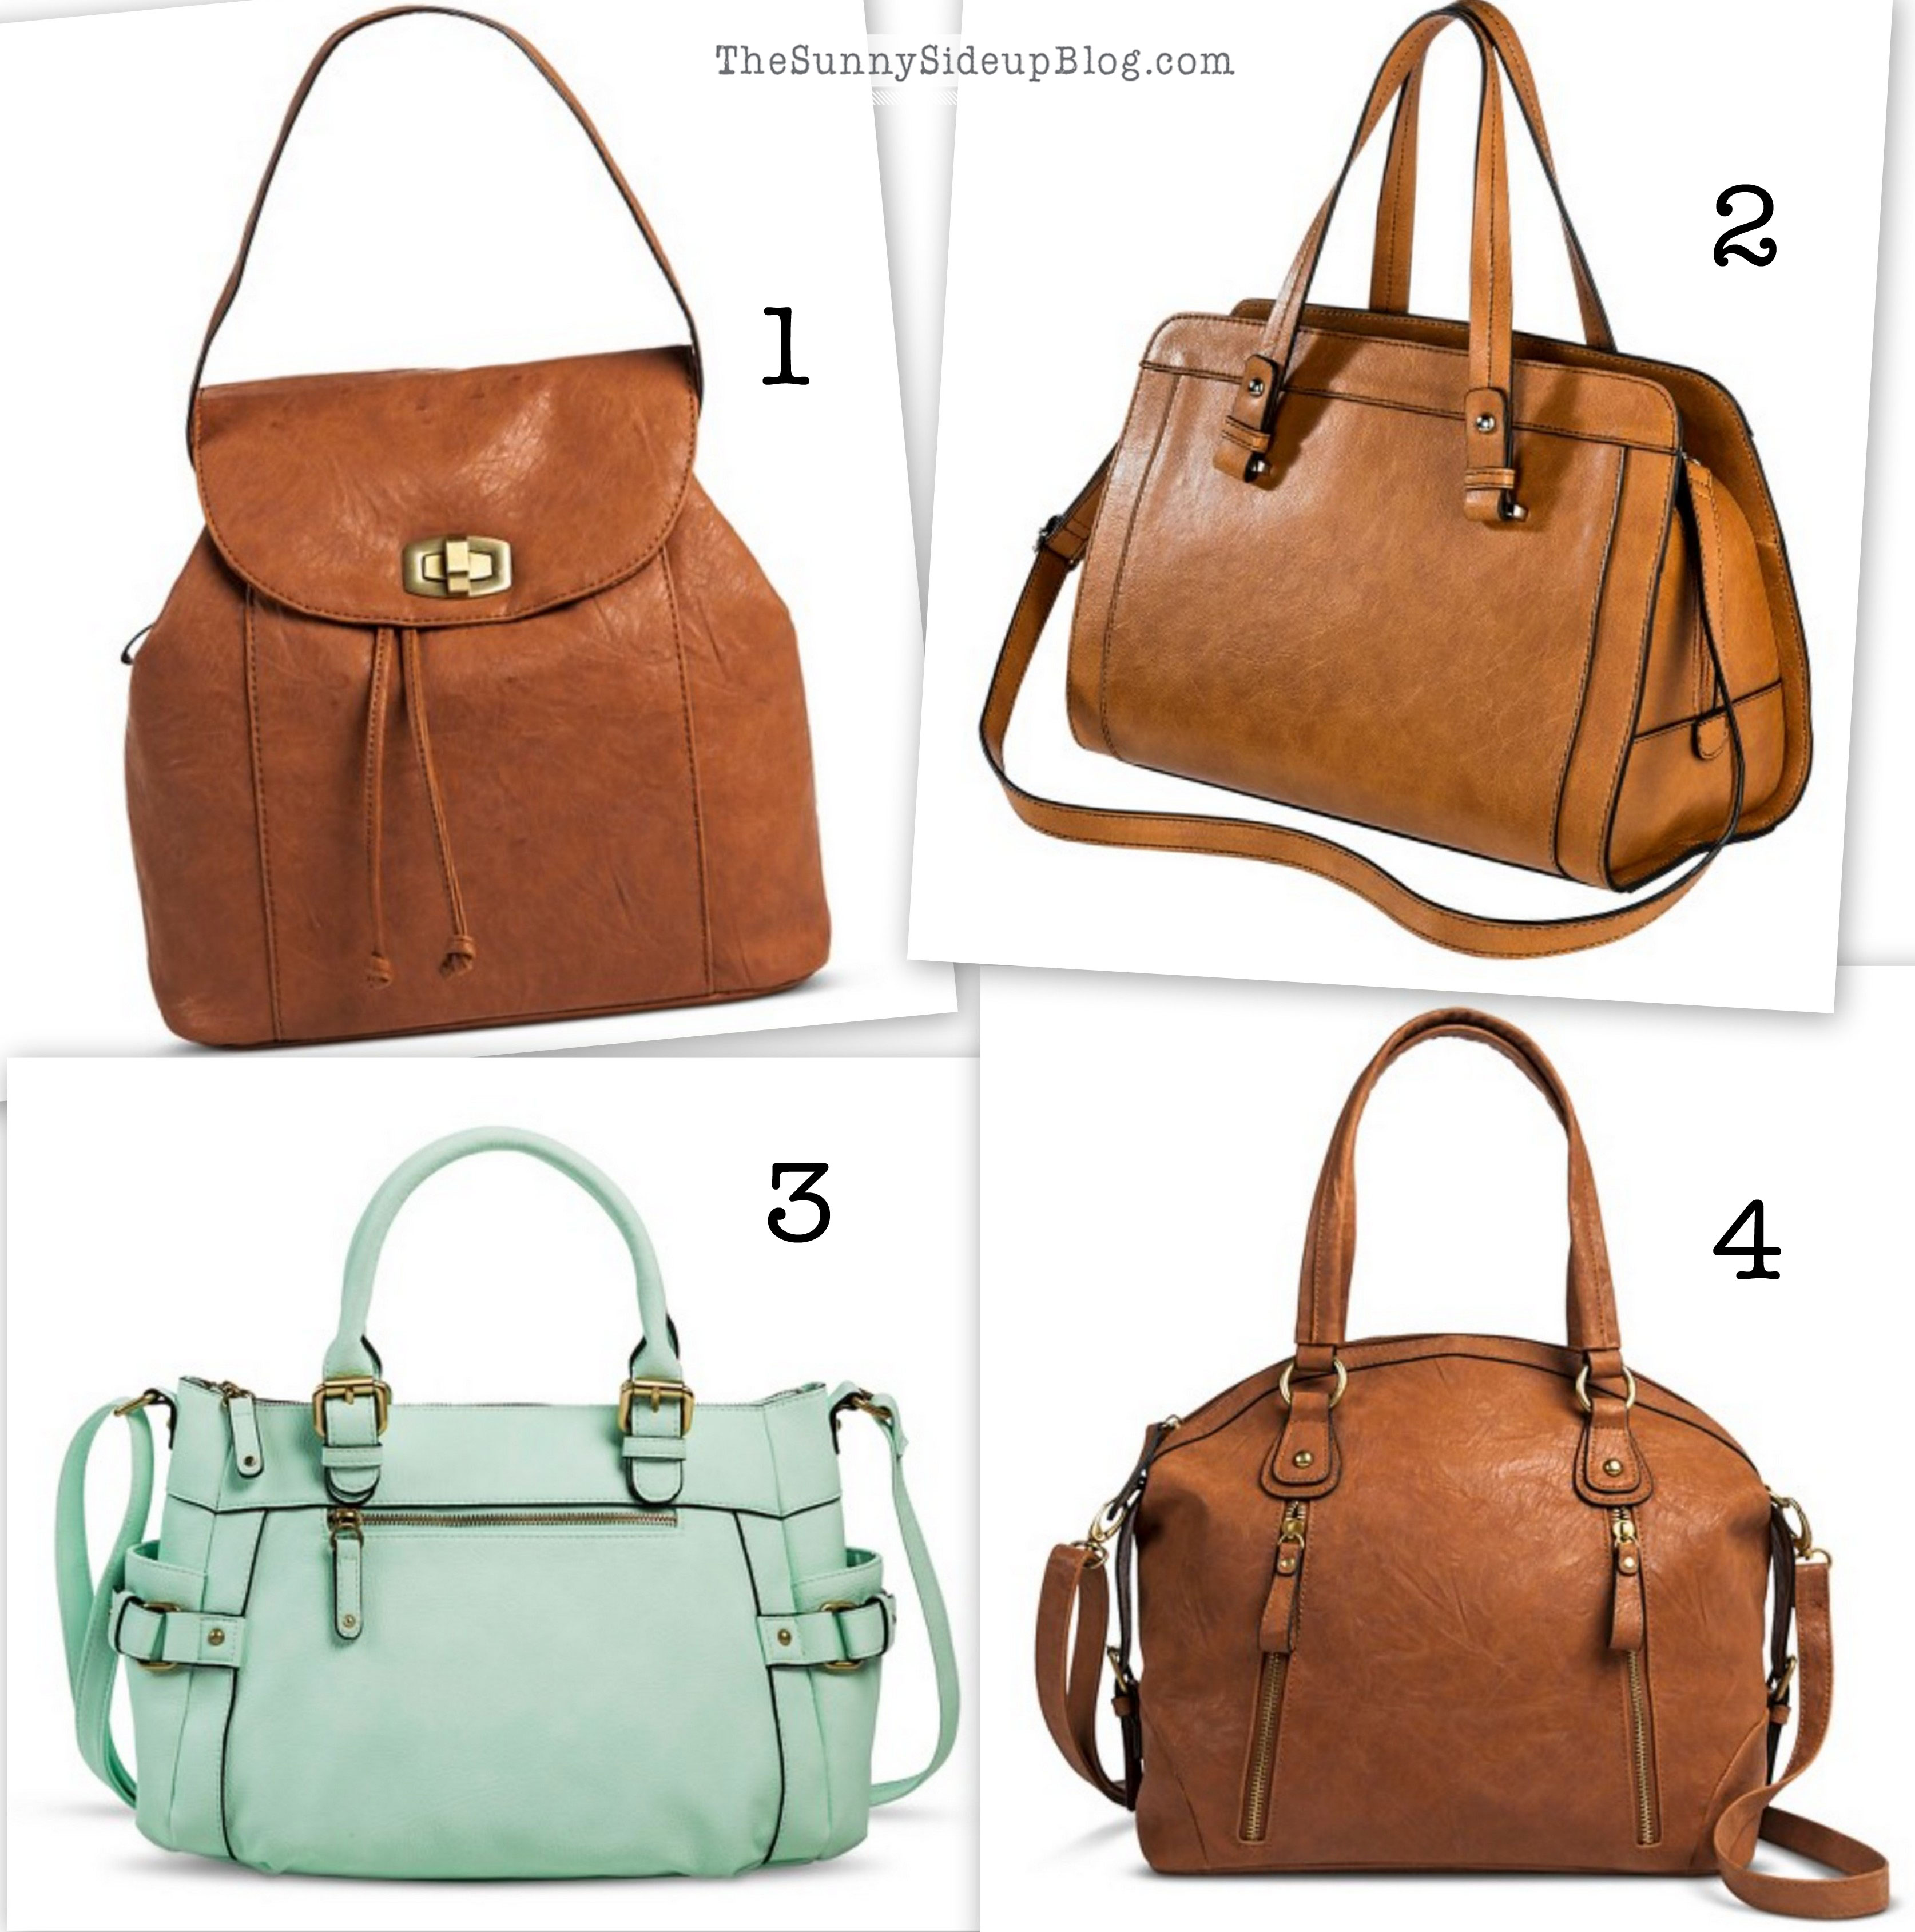 Favorite handbags for Fall The Sunny Side Up Blog